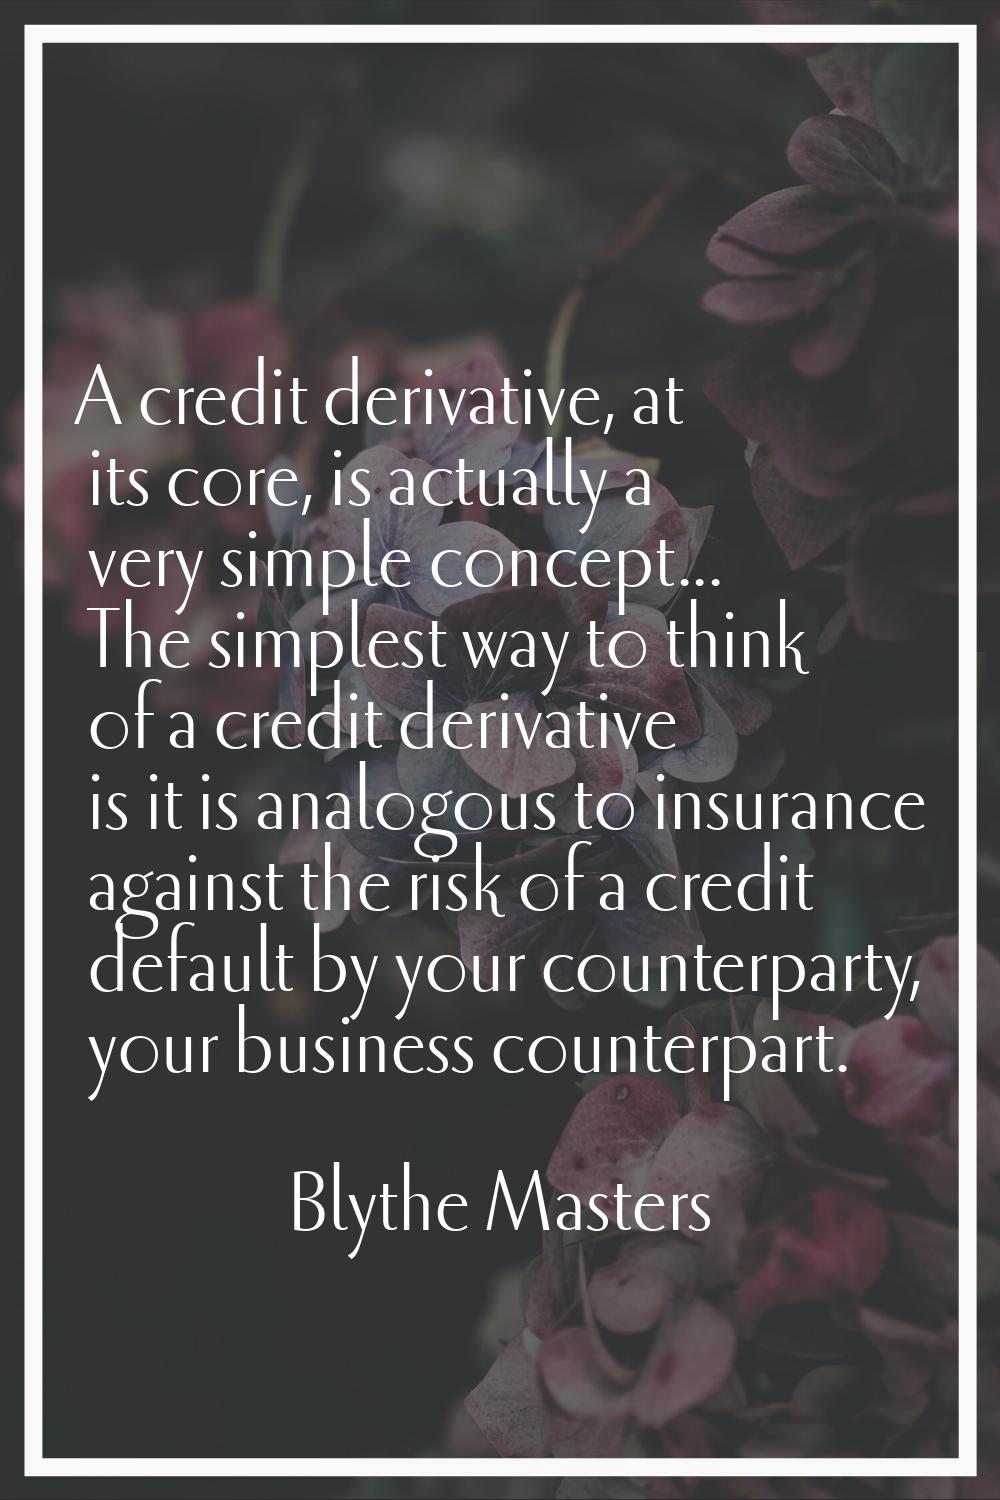 A credit derivative, at its core, is actually a very simple concept... The simplest way to think of